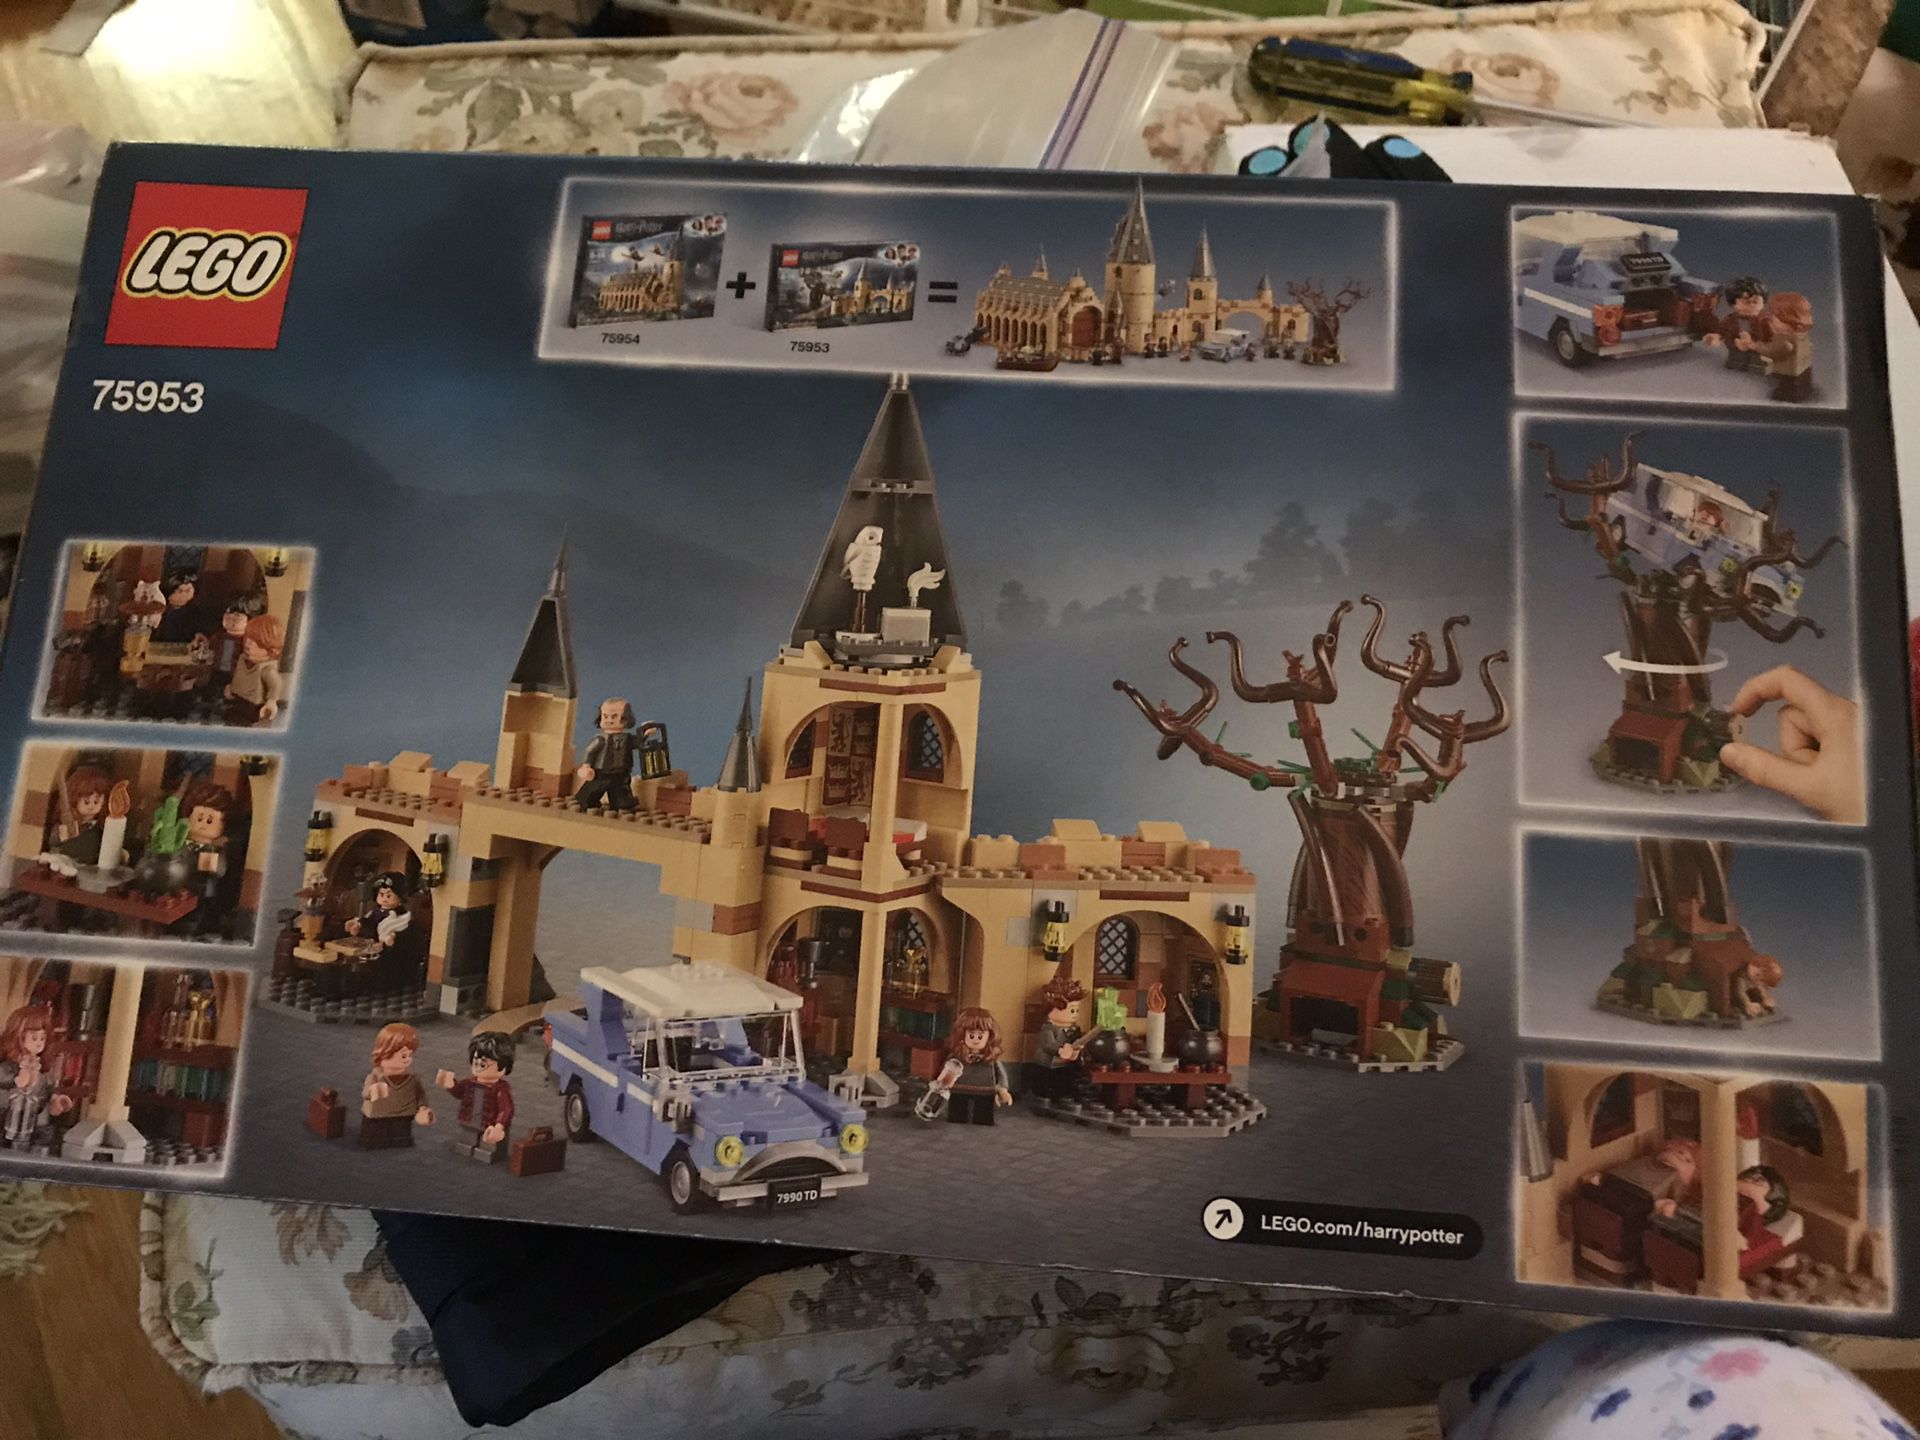 Lego Harry Potter whomping Willow #75953